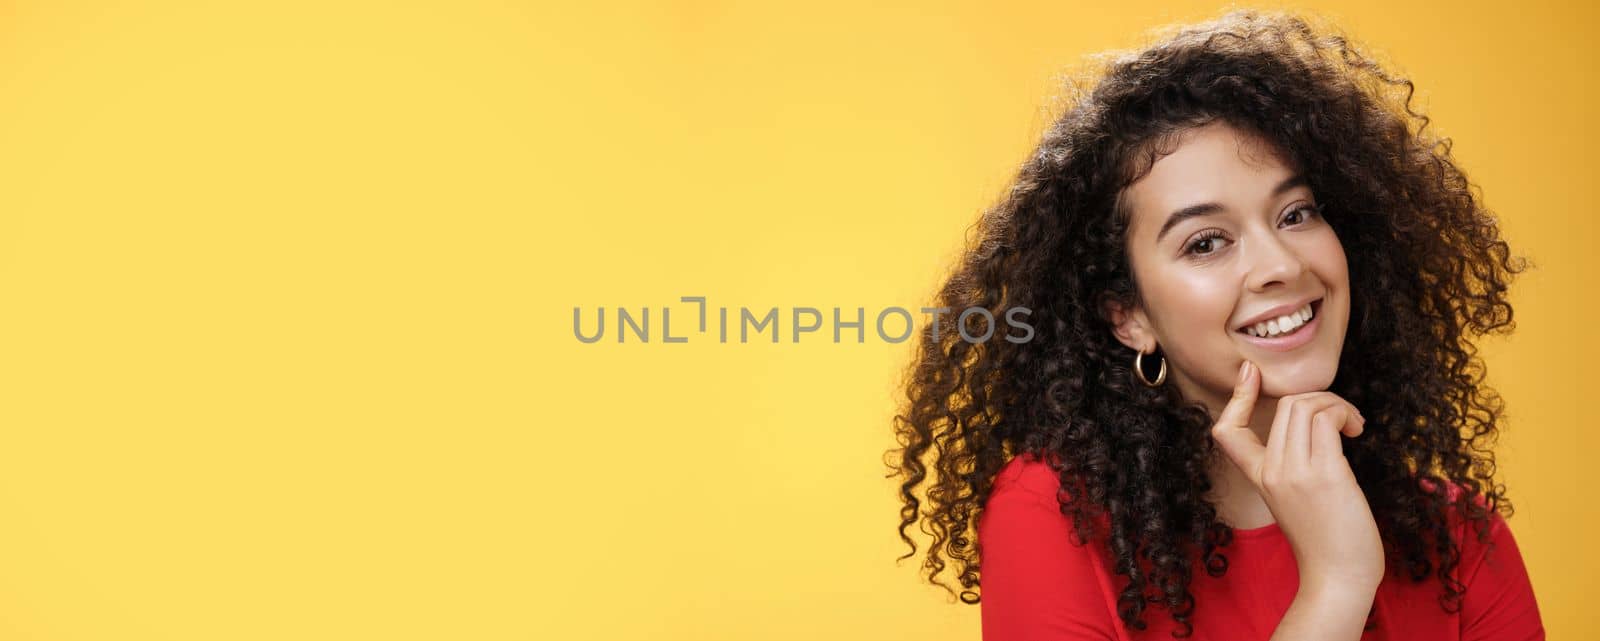 Headshot of cute silly and tender feminine romantic woman with curly hairstyle touching lip with index finger making eyes at camera and smiling as using seduction skills over yellow background by Benzoix